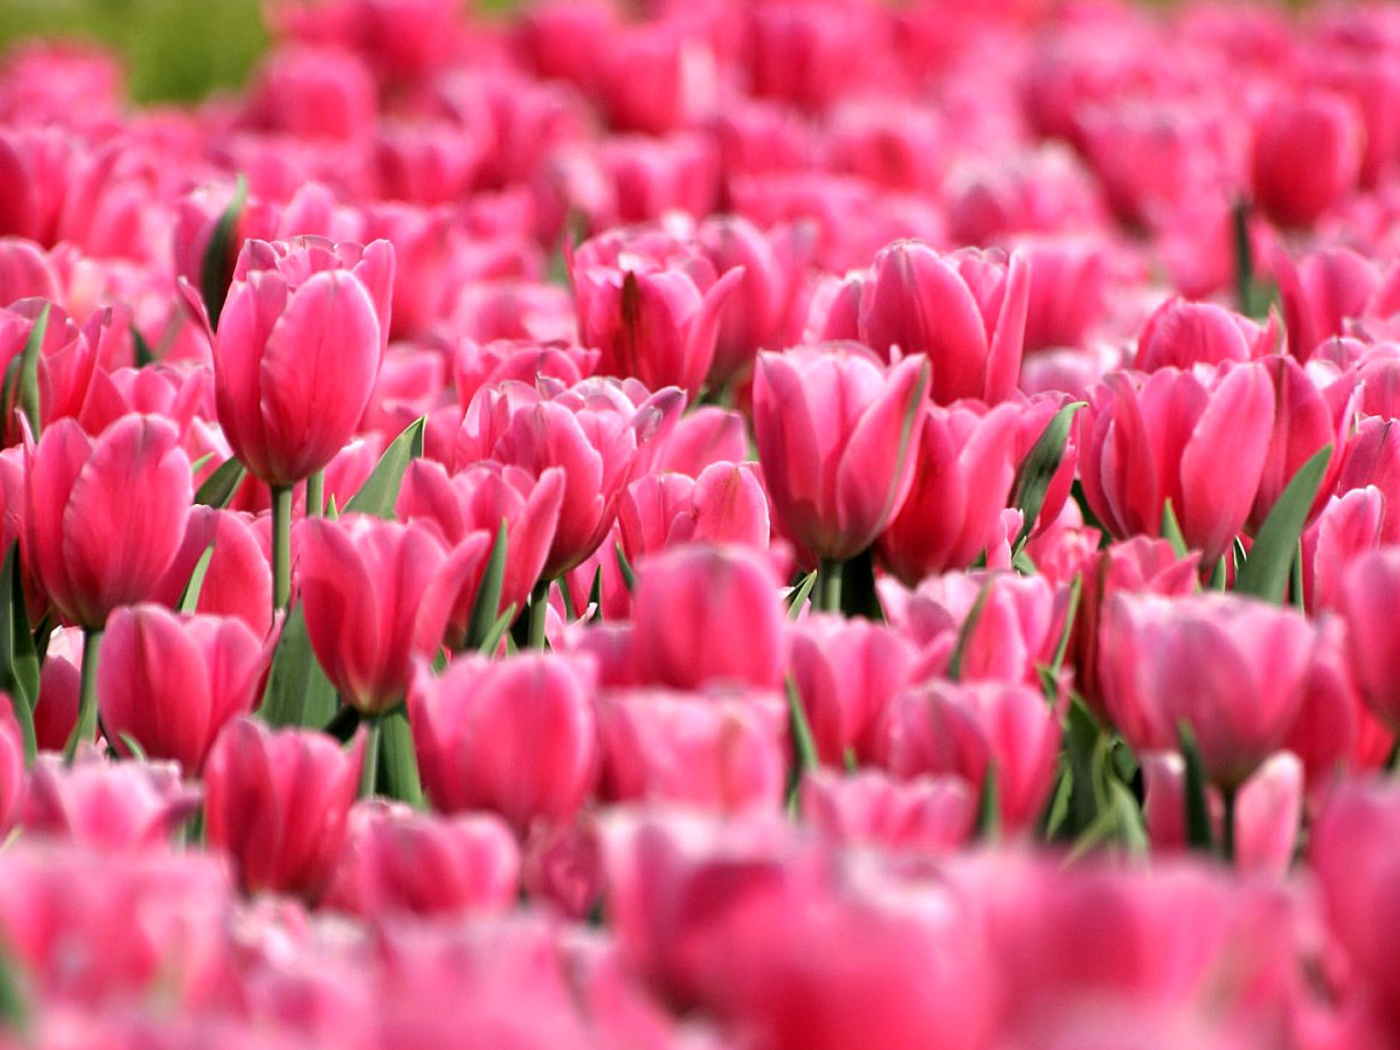 Pink Tulips in Holland Festival wallpaper 1400x1050